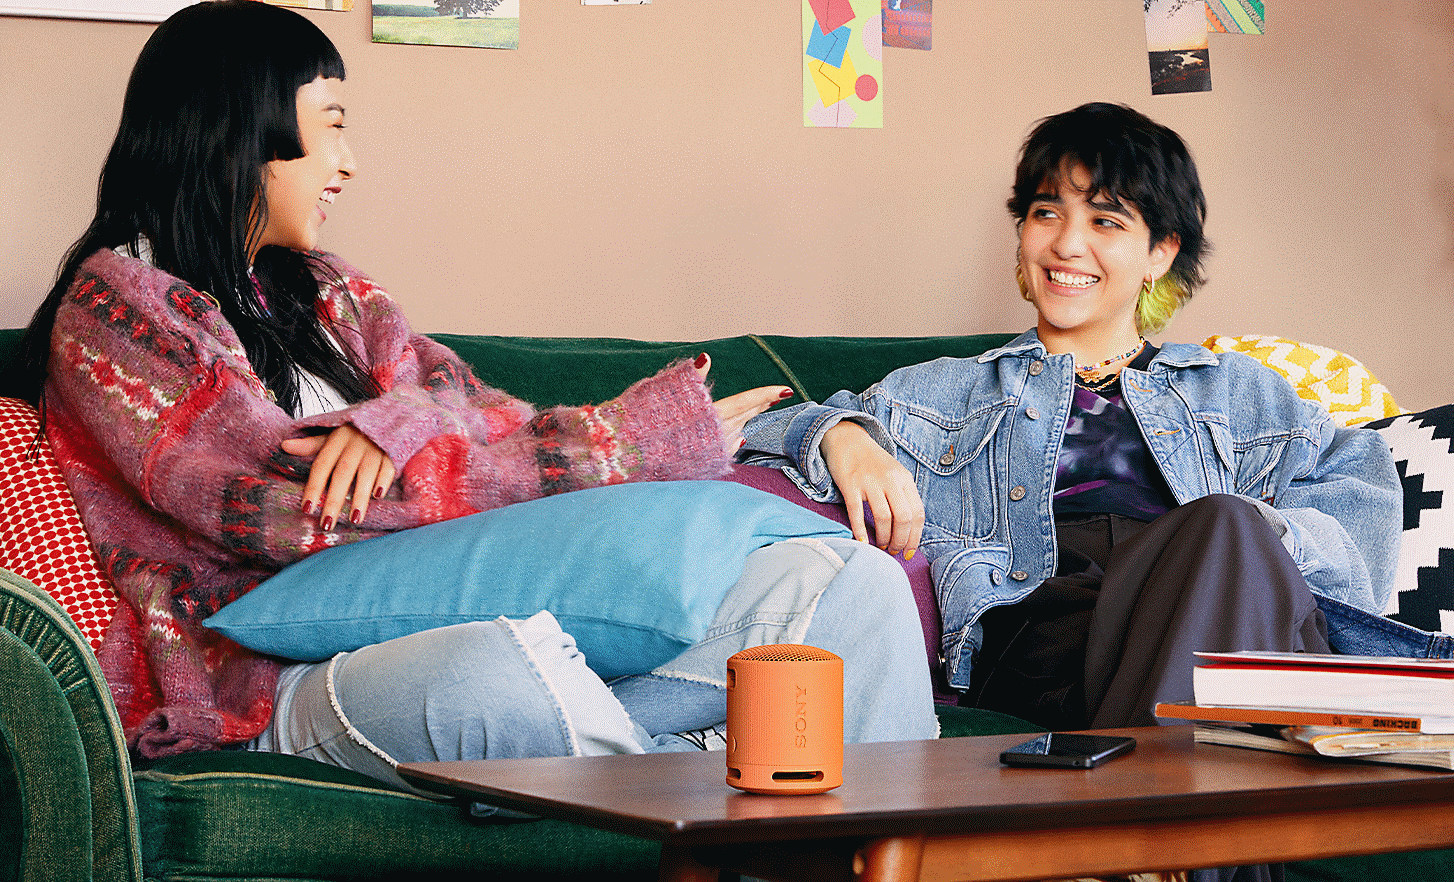 Image of two people smiling whilst sitting on a sofa with an orange SRS-XB100 speaker on the coffee table in front of them